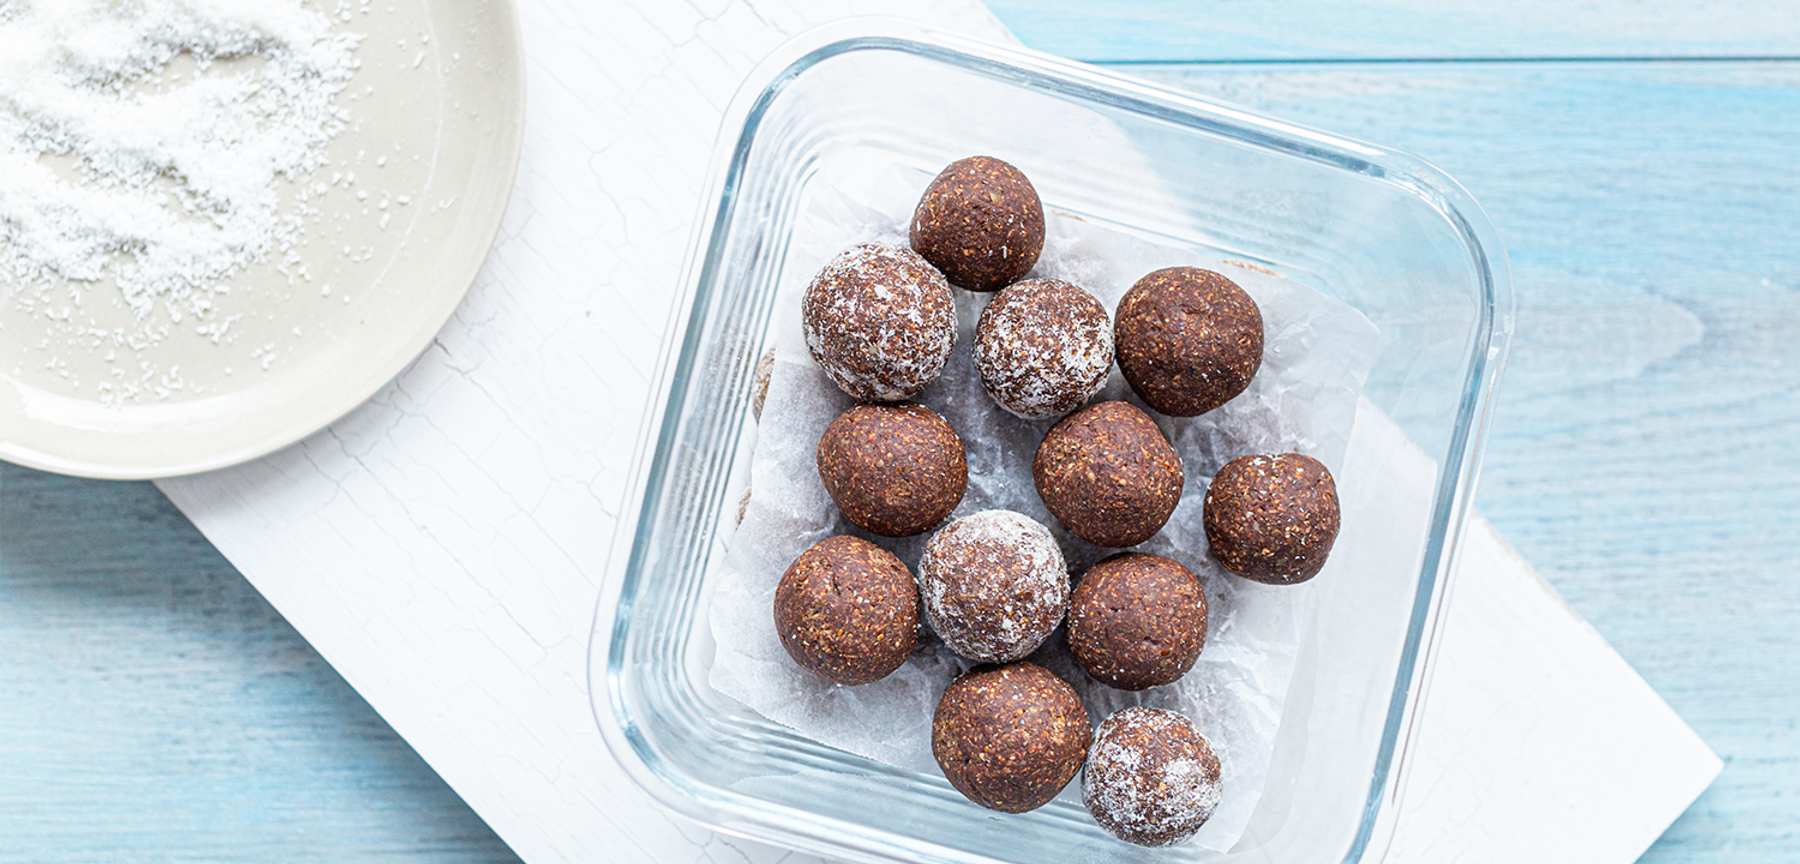 Choccy Chia Snack Ball Mix Multipack